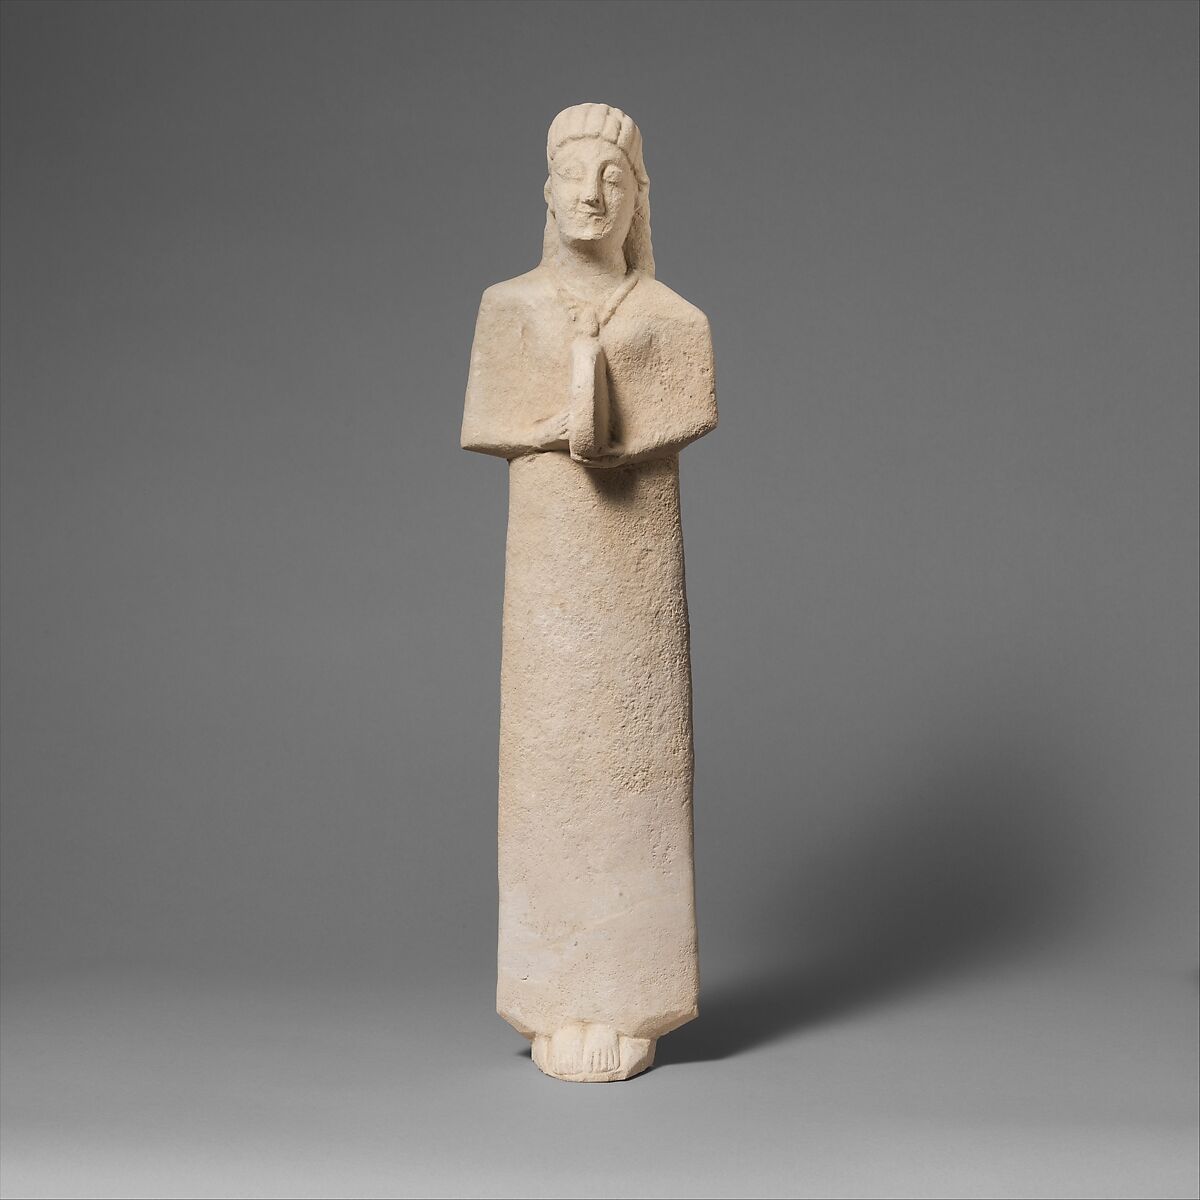 Limestone statuette of a female votary (worshipper) playing a tambourine, Limestone, Cypriot 